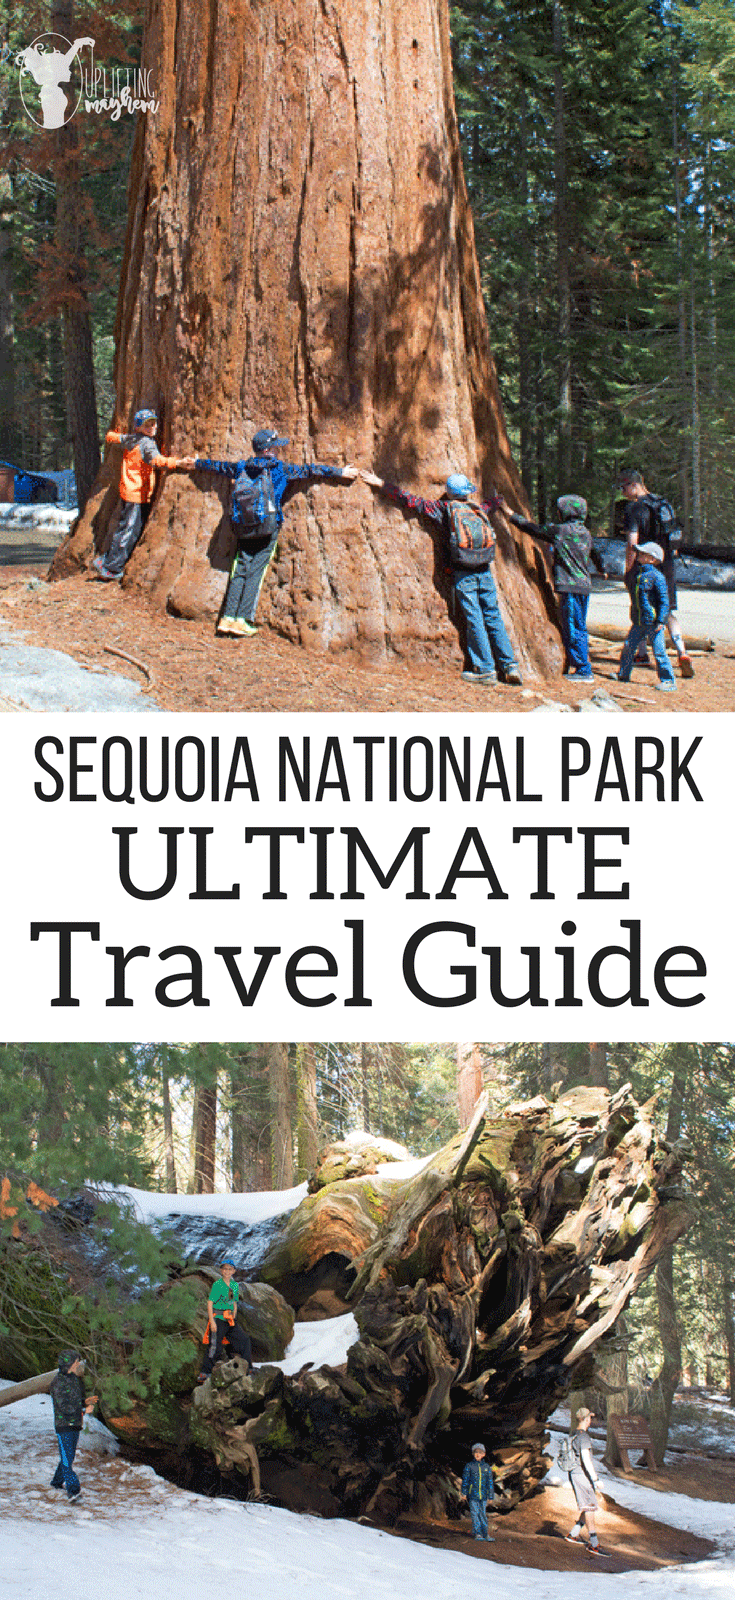 Sequoia National Park Ultimate Travel Guide: Everything you need to know about this amazing park. Routes, hikes, and lots of other tips to make your trip amazing!